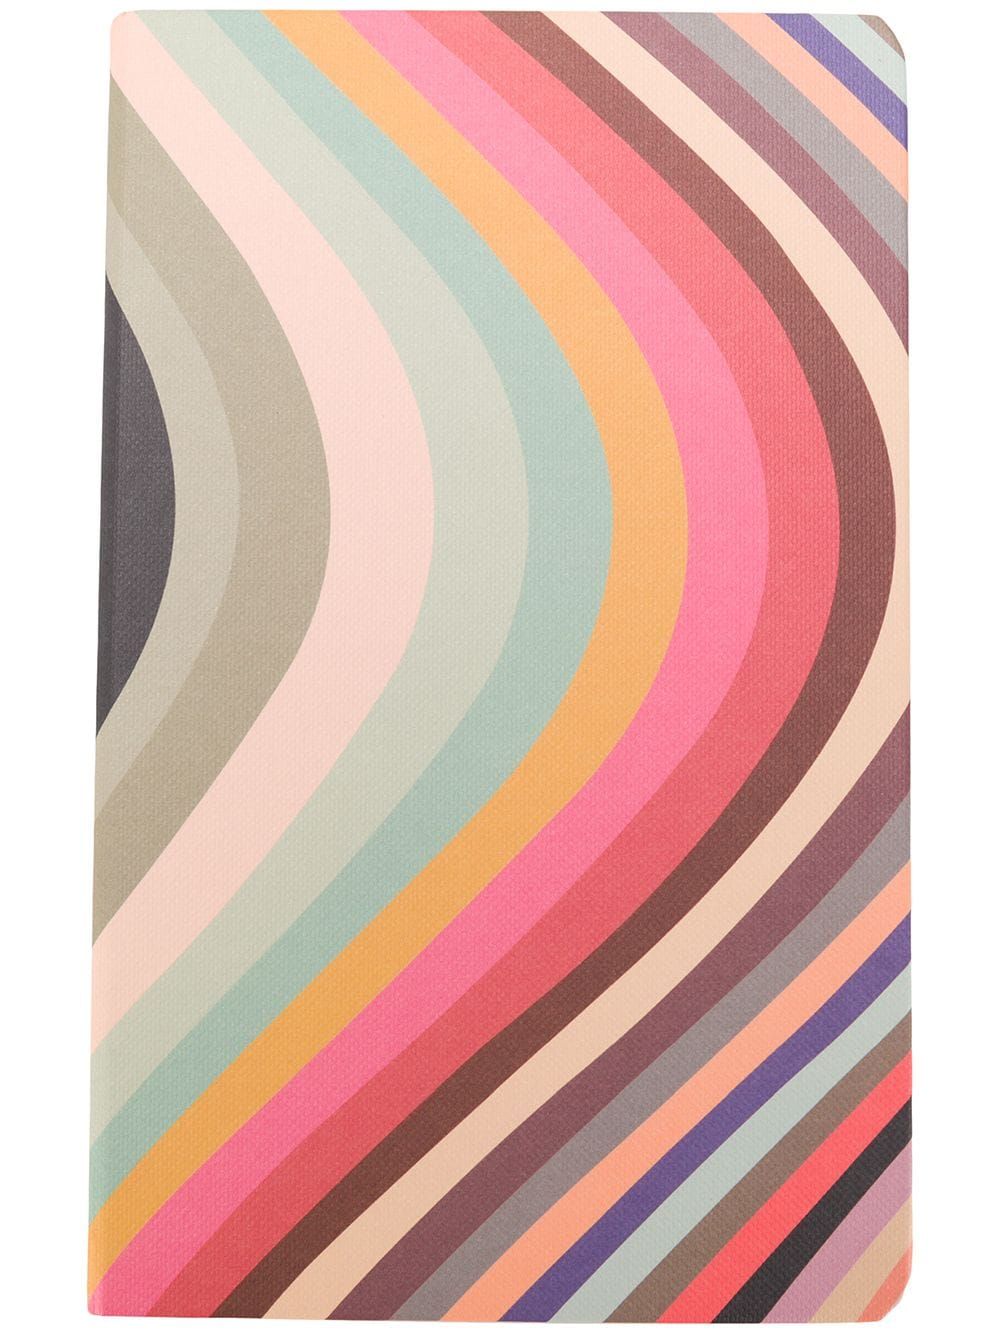 PAUL SMITH Printed Notebook. Prints, Wall collage, Print patterns